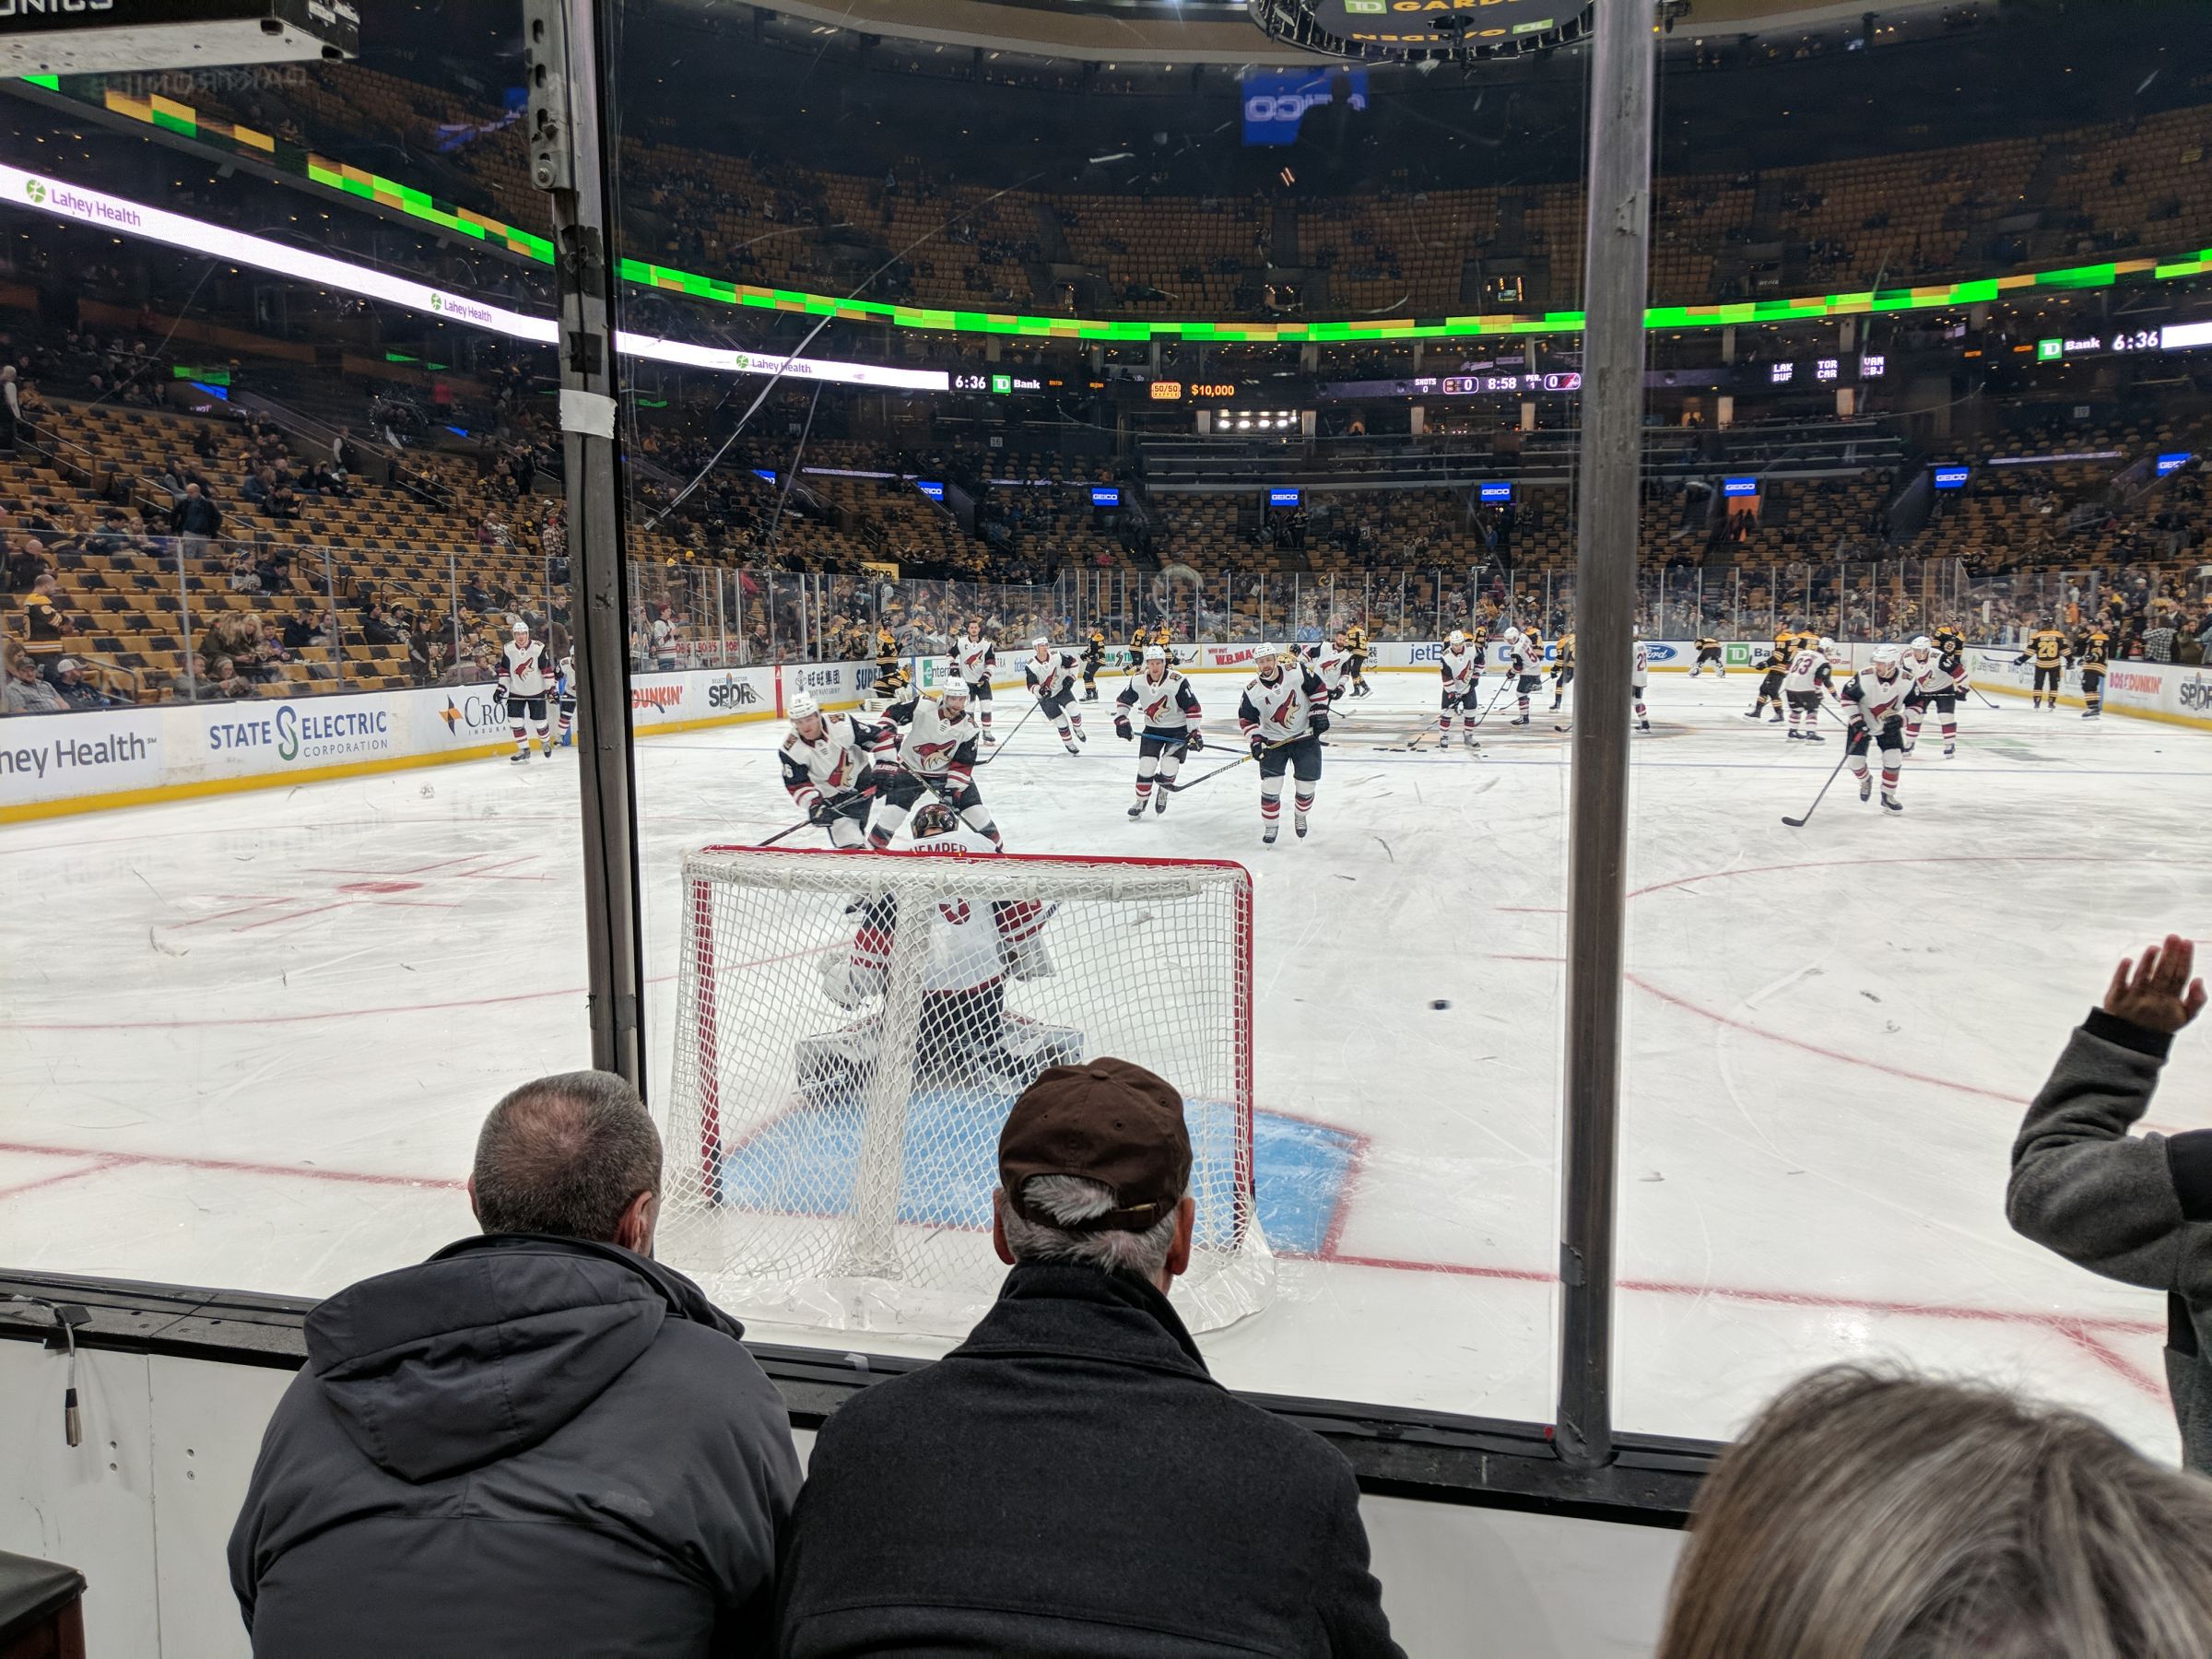 loge 6, row 3 seat view  for hockey - td garden